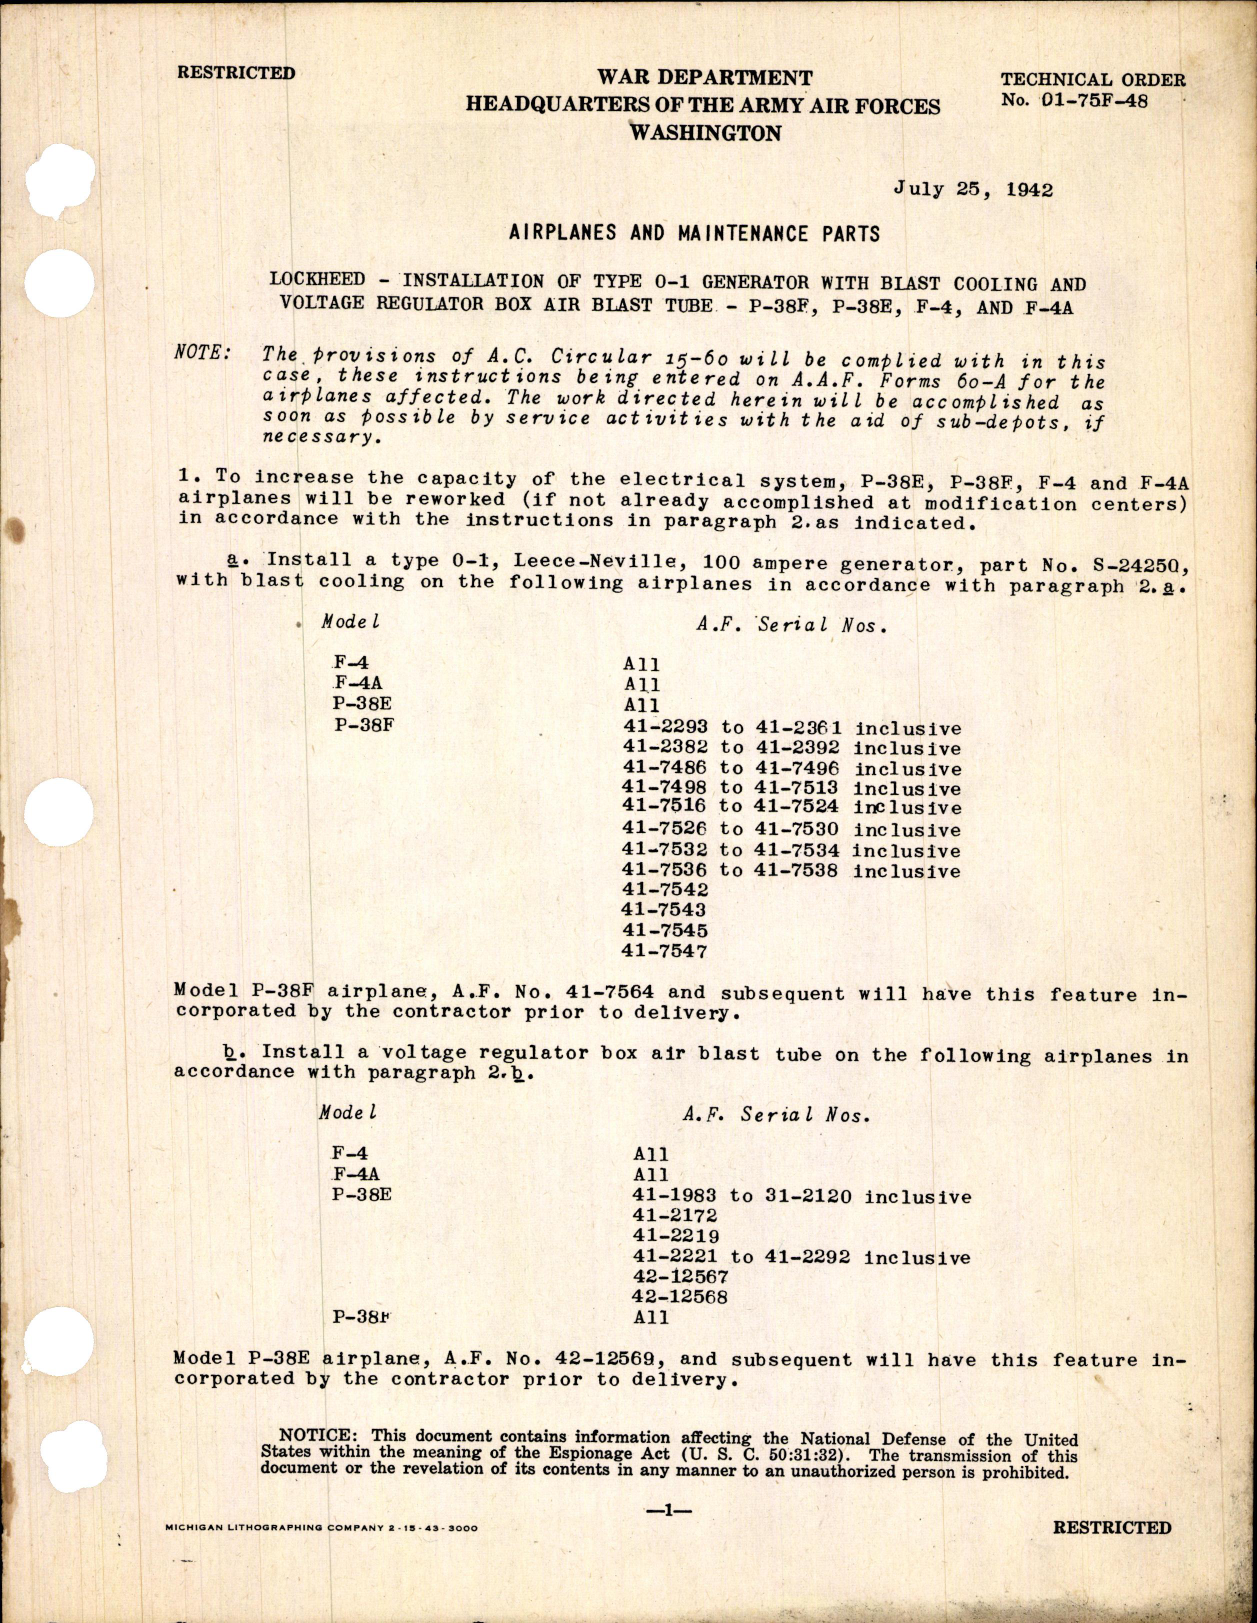 Sample page 1 from AirCorps Library document: Installation of Type 0-1 Generator with Blast Cooling and Voltage Regulator Box Air Blast Tube for P-38F, E, F-4, and -4A